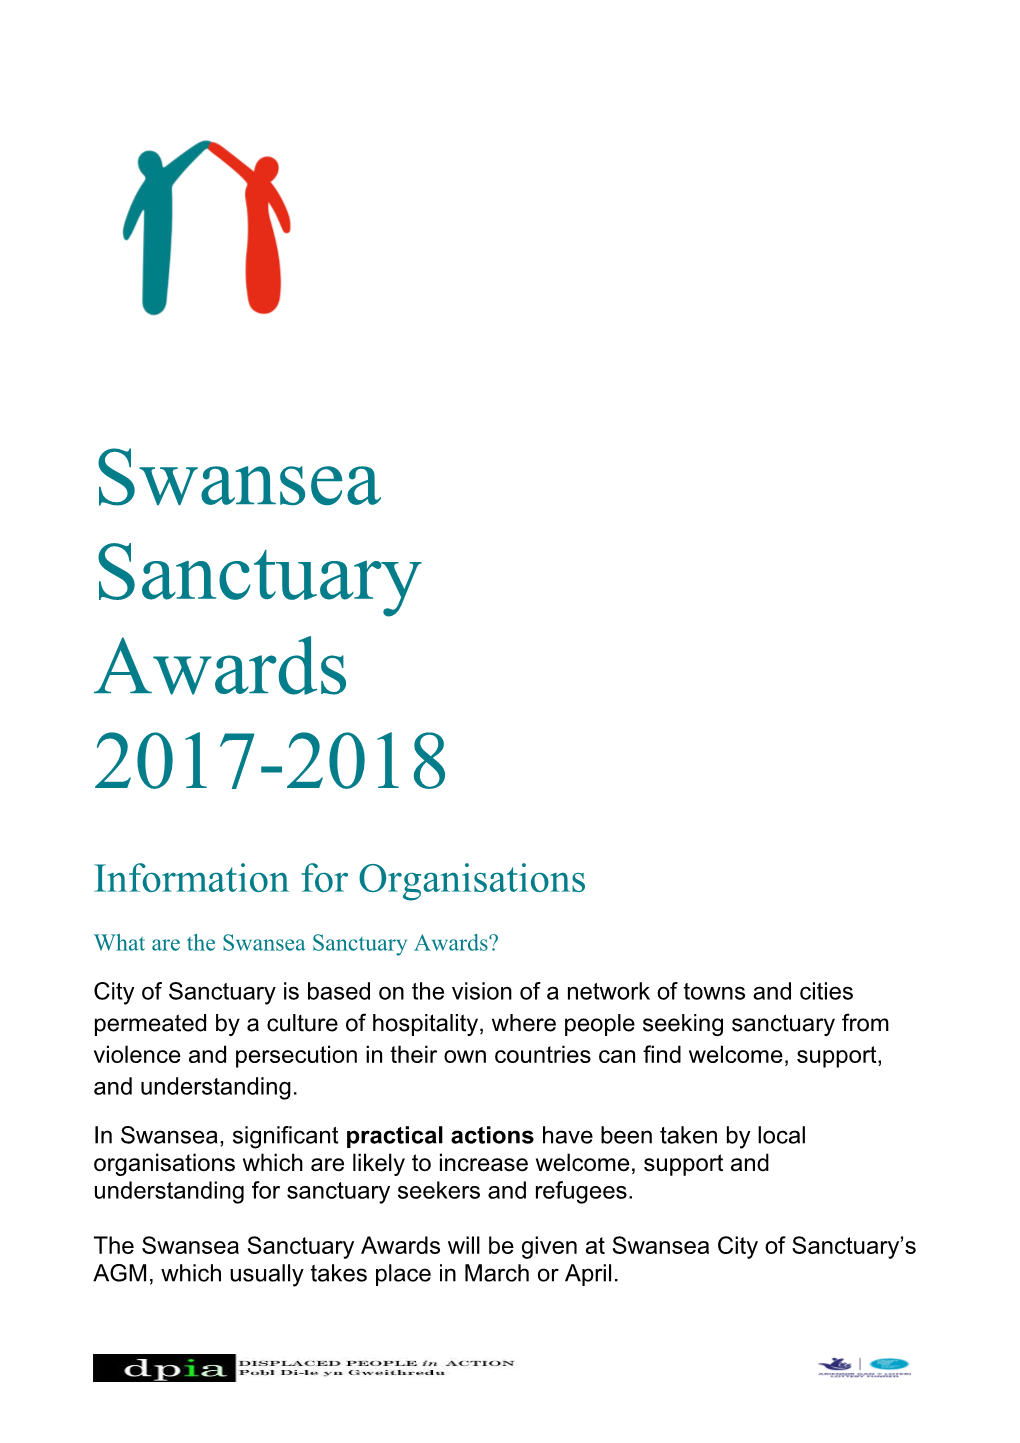 What Are the Swansea Sanctuary Awards?